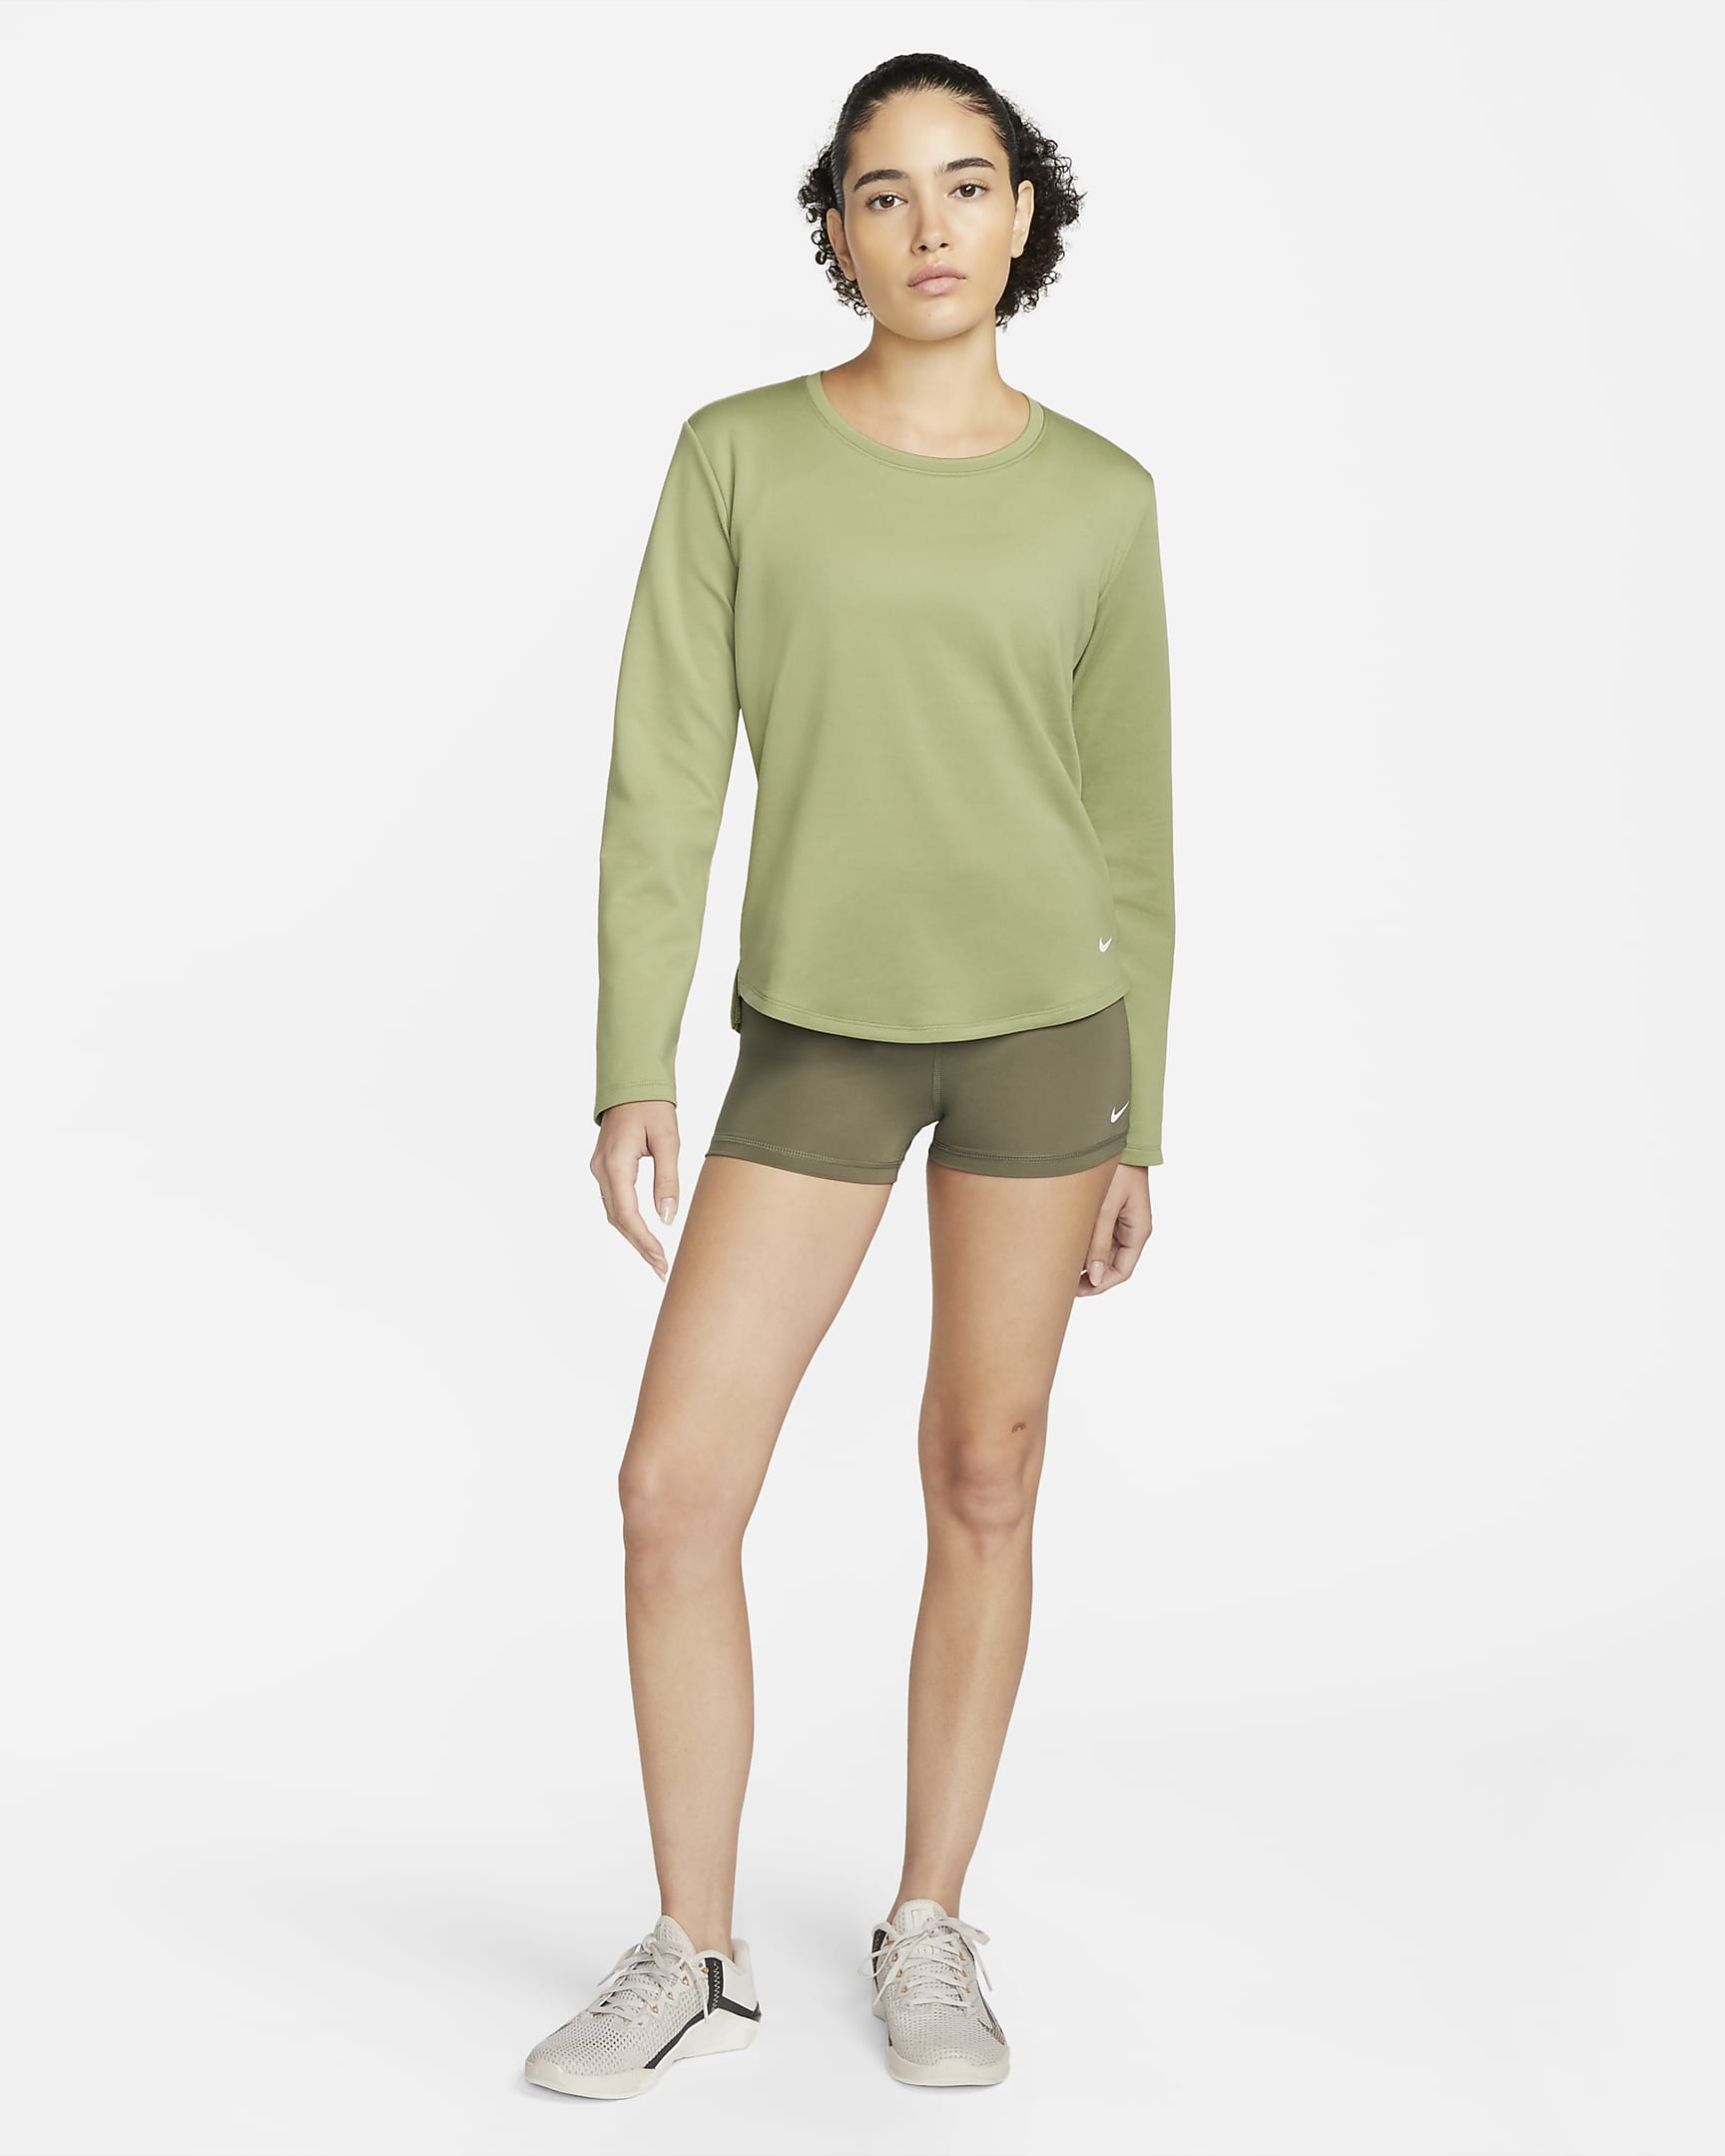 Nike Therma-FIT One Women's Long-Sleeve Top. Nike.com